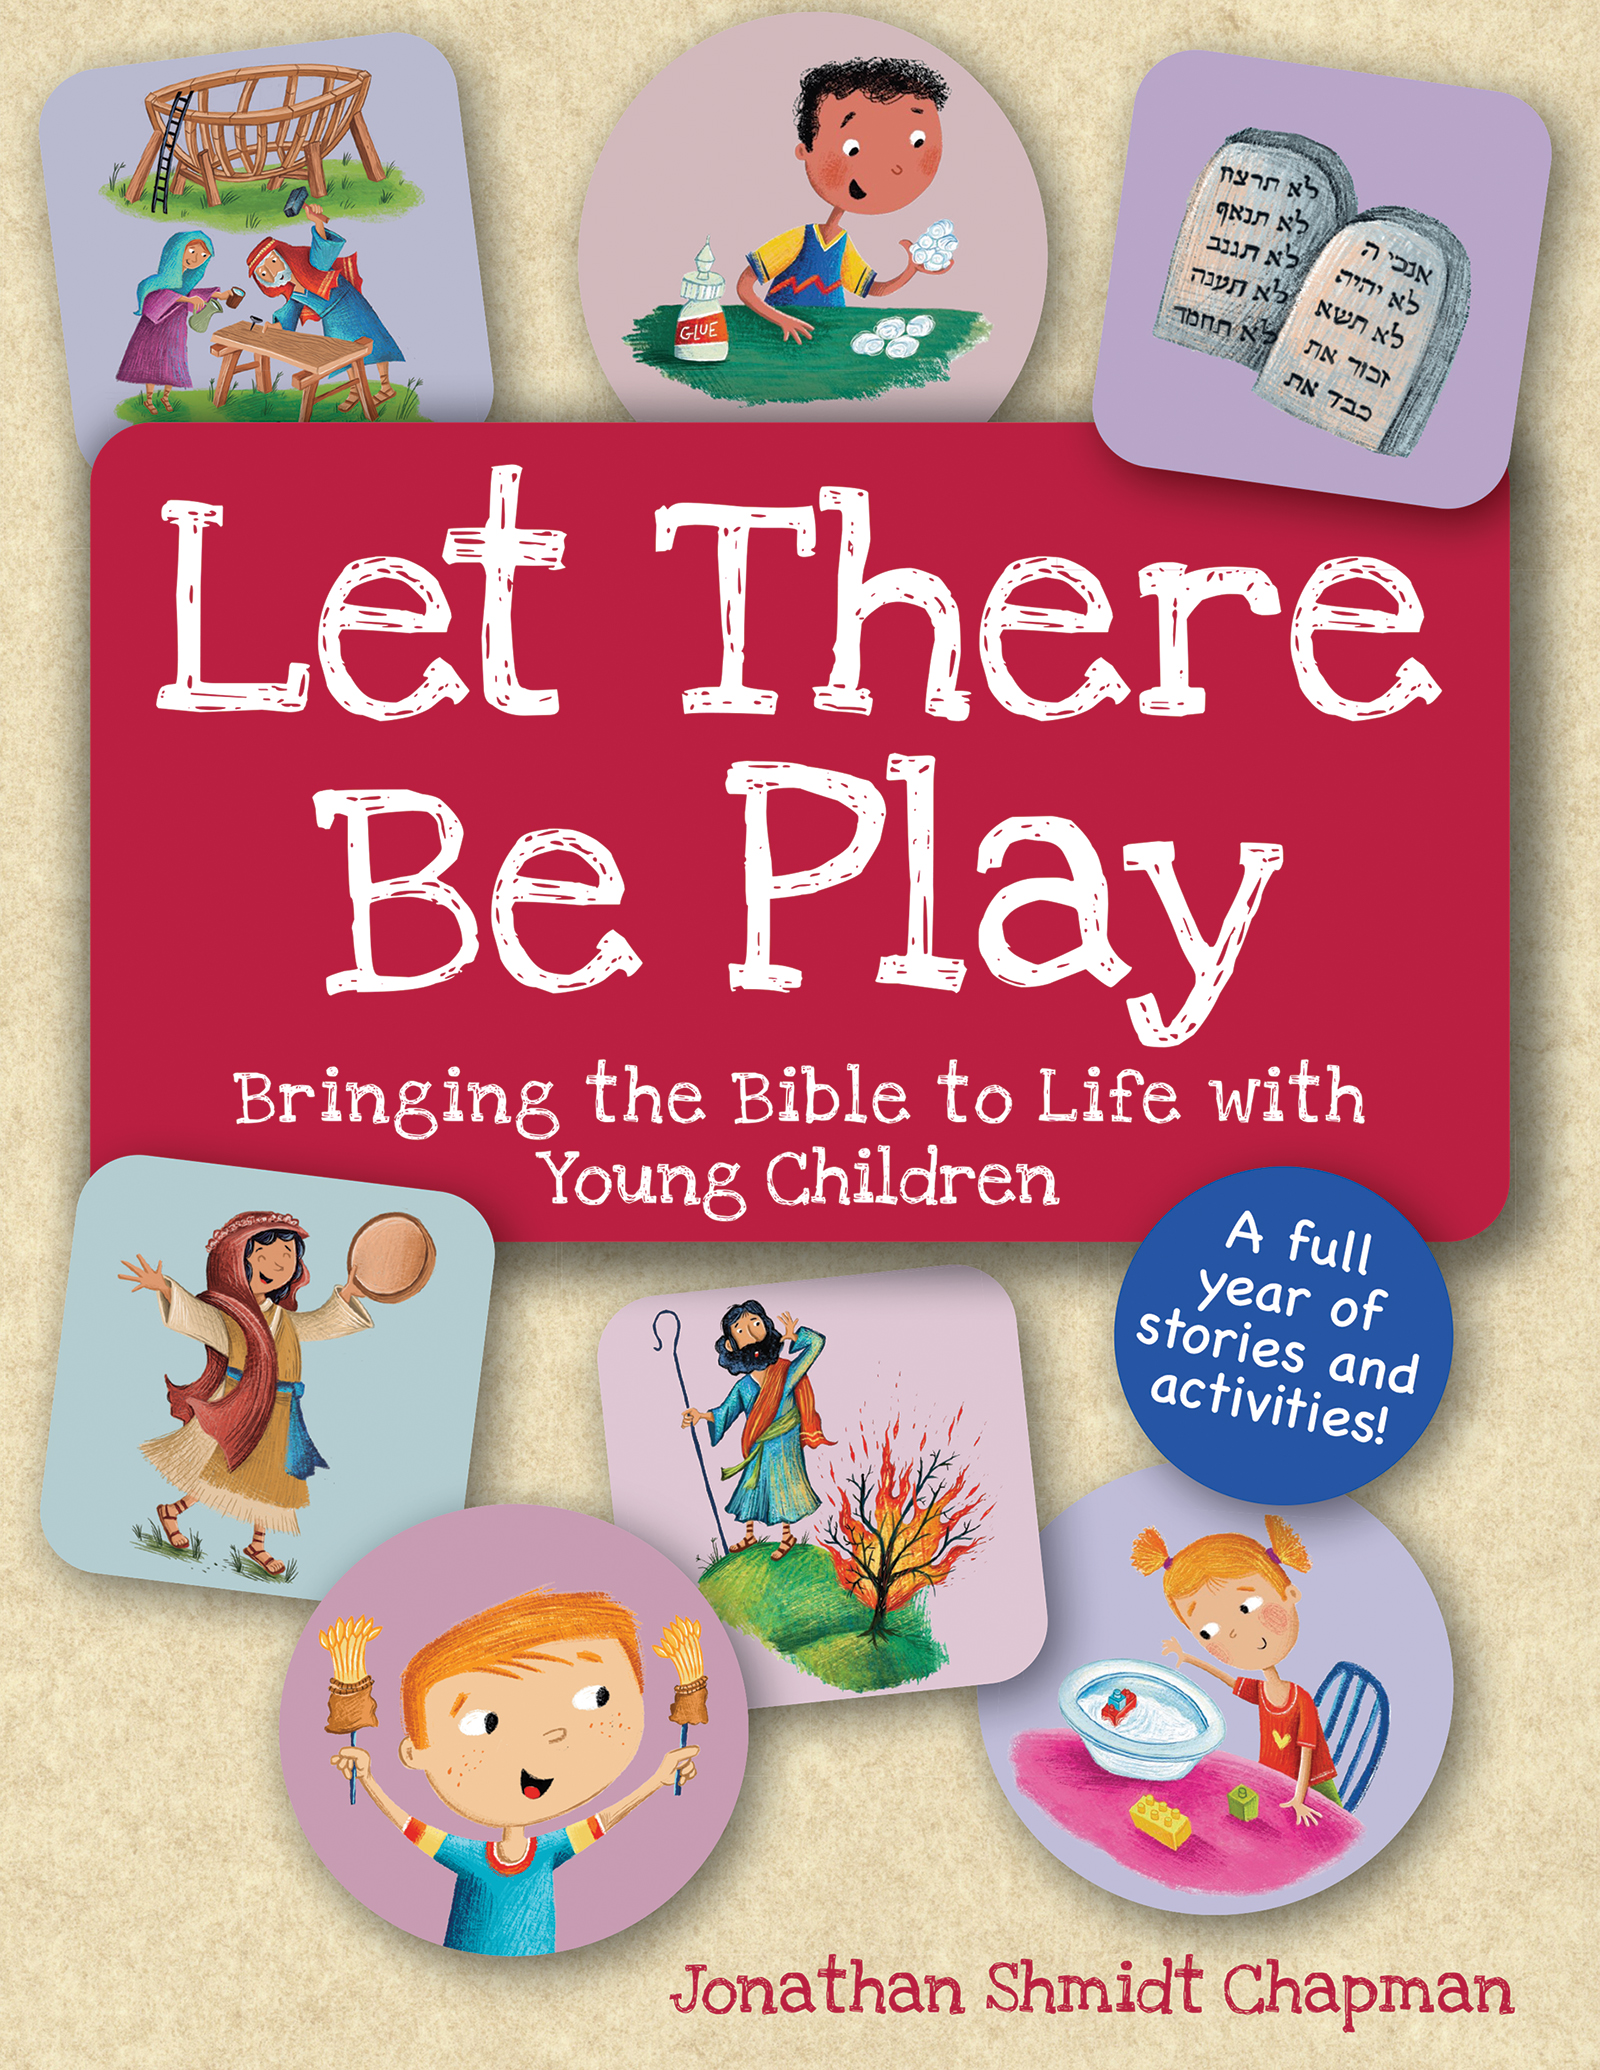 Imagine, Explore, Make, Wonder: Let There Be Play!